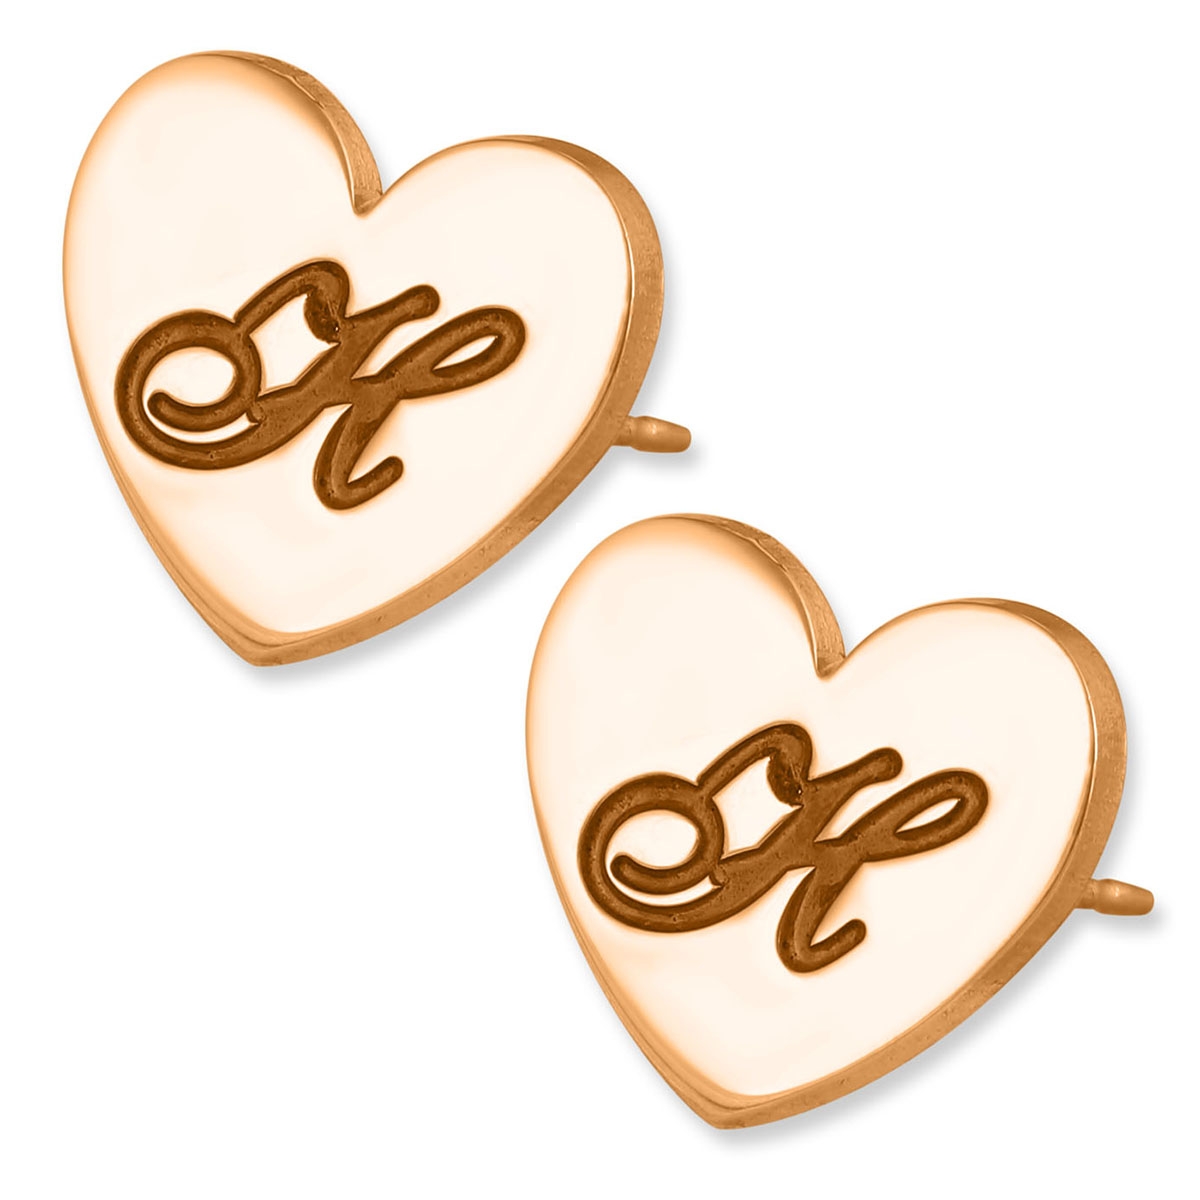 24k Rose Gold Plated Silver Initials Heart Personalized Stud Earrings-Cursive Font - 1